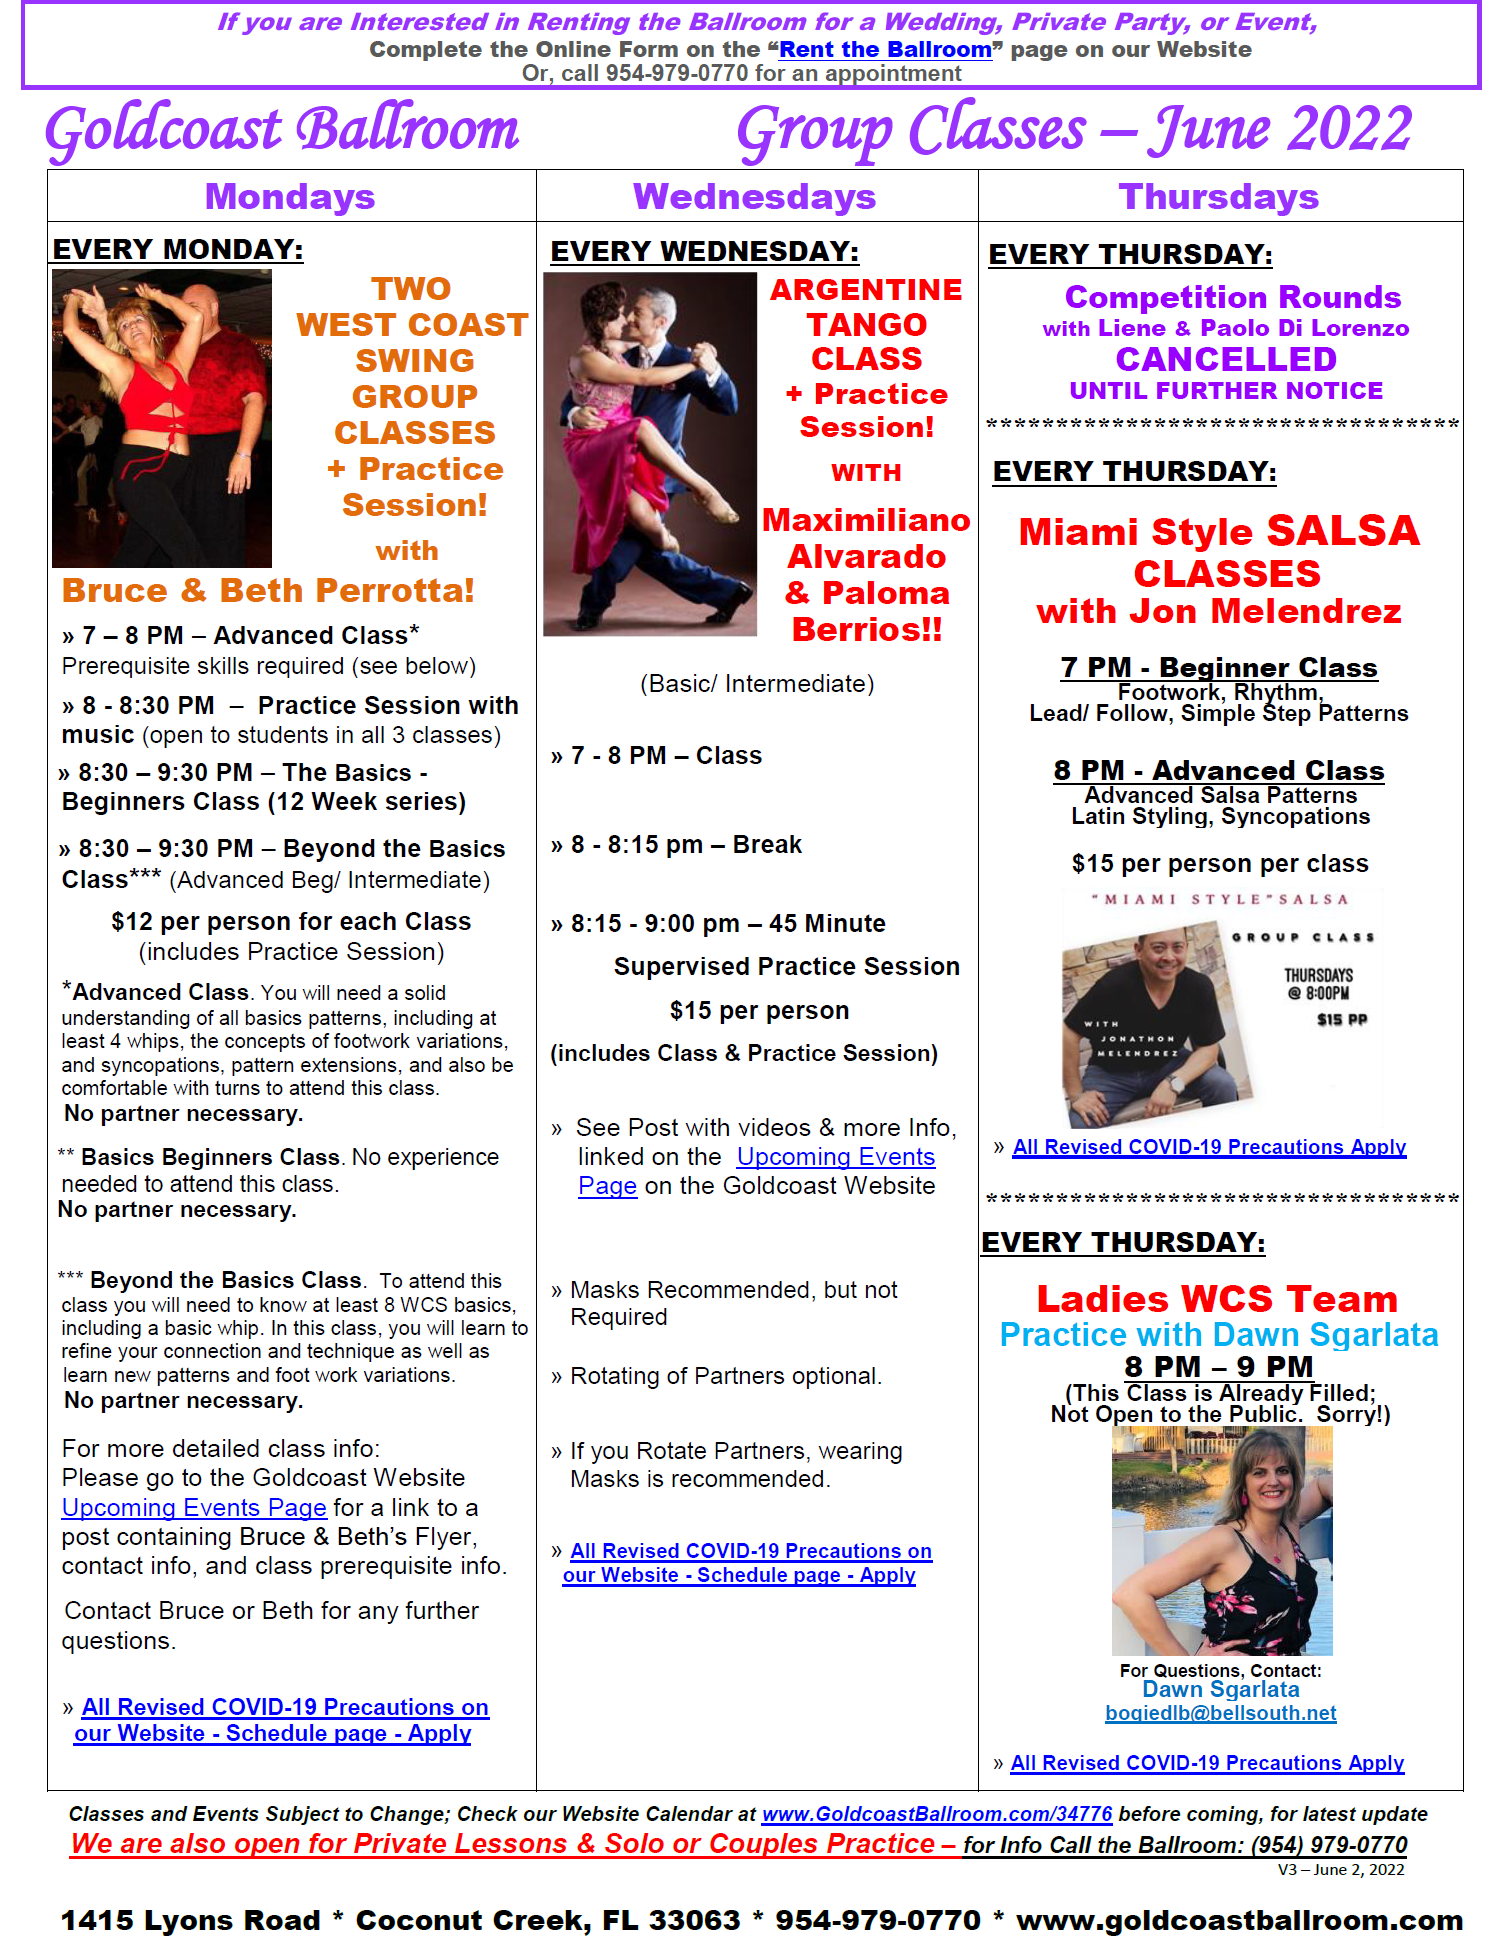 Goldcoast Ballroom June, 2022 Calendar - Group Class Schedule - Click to view as PDF doc with clickable links